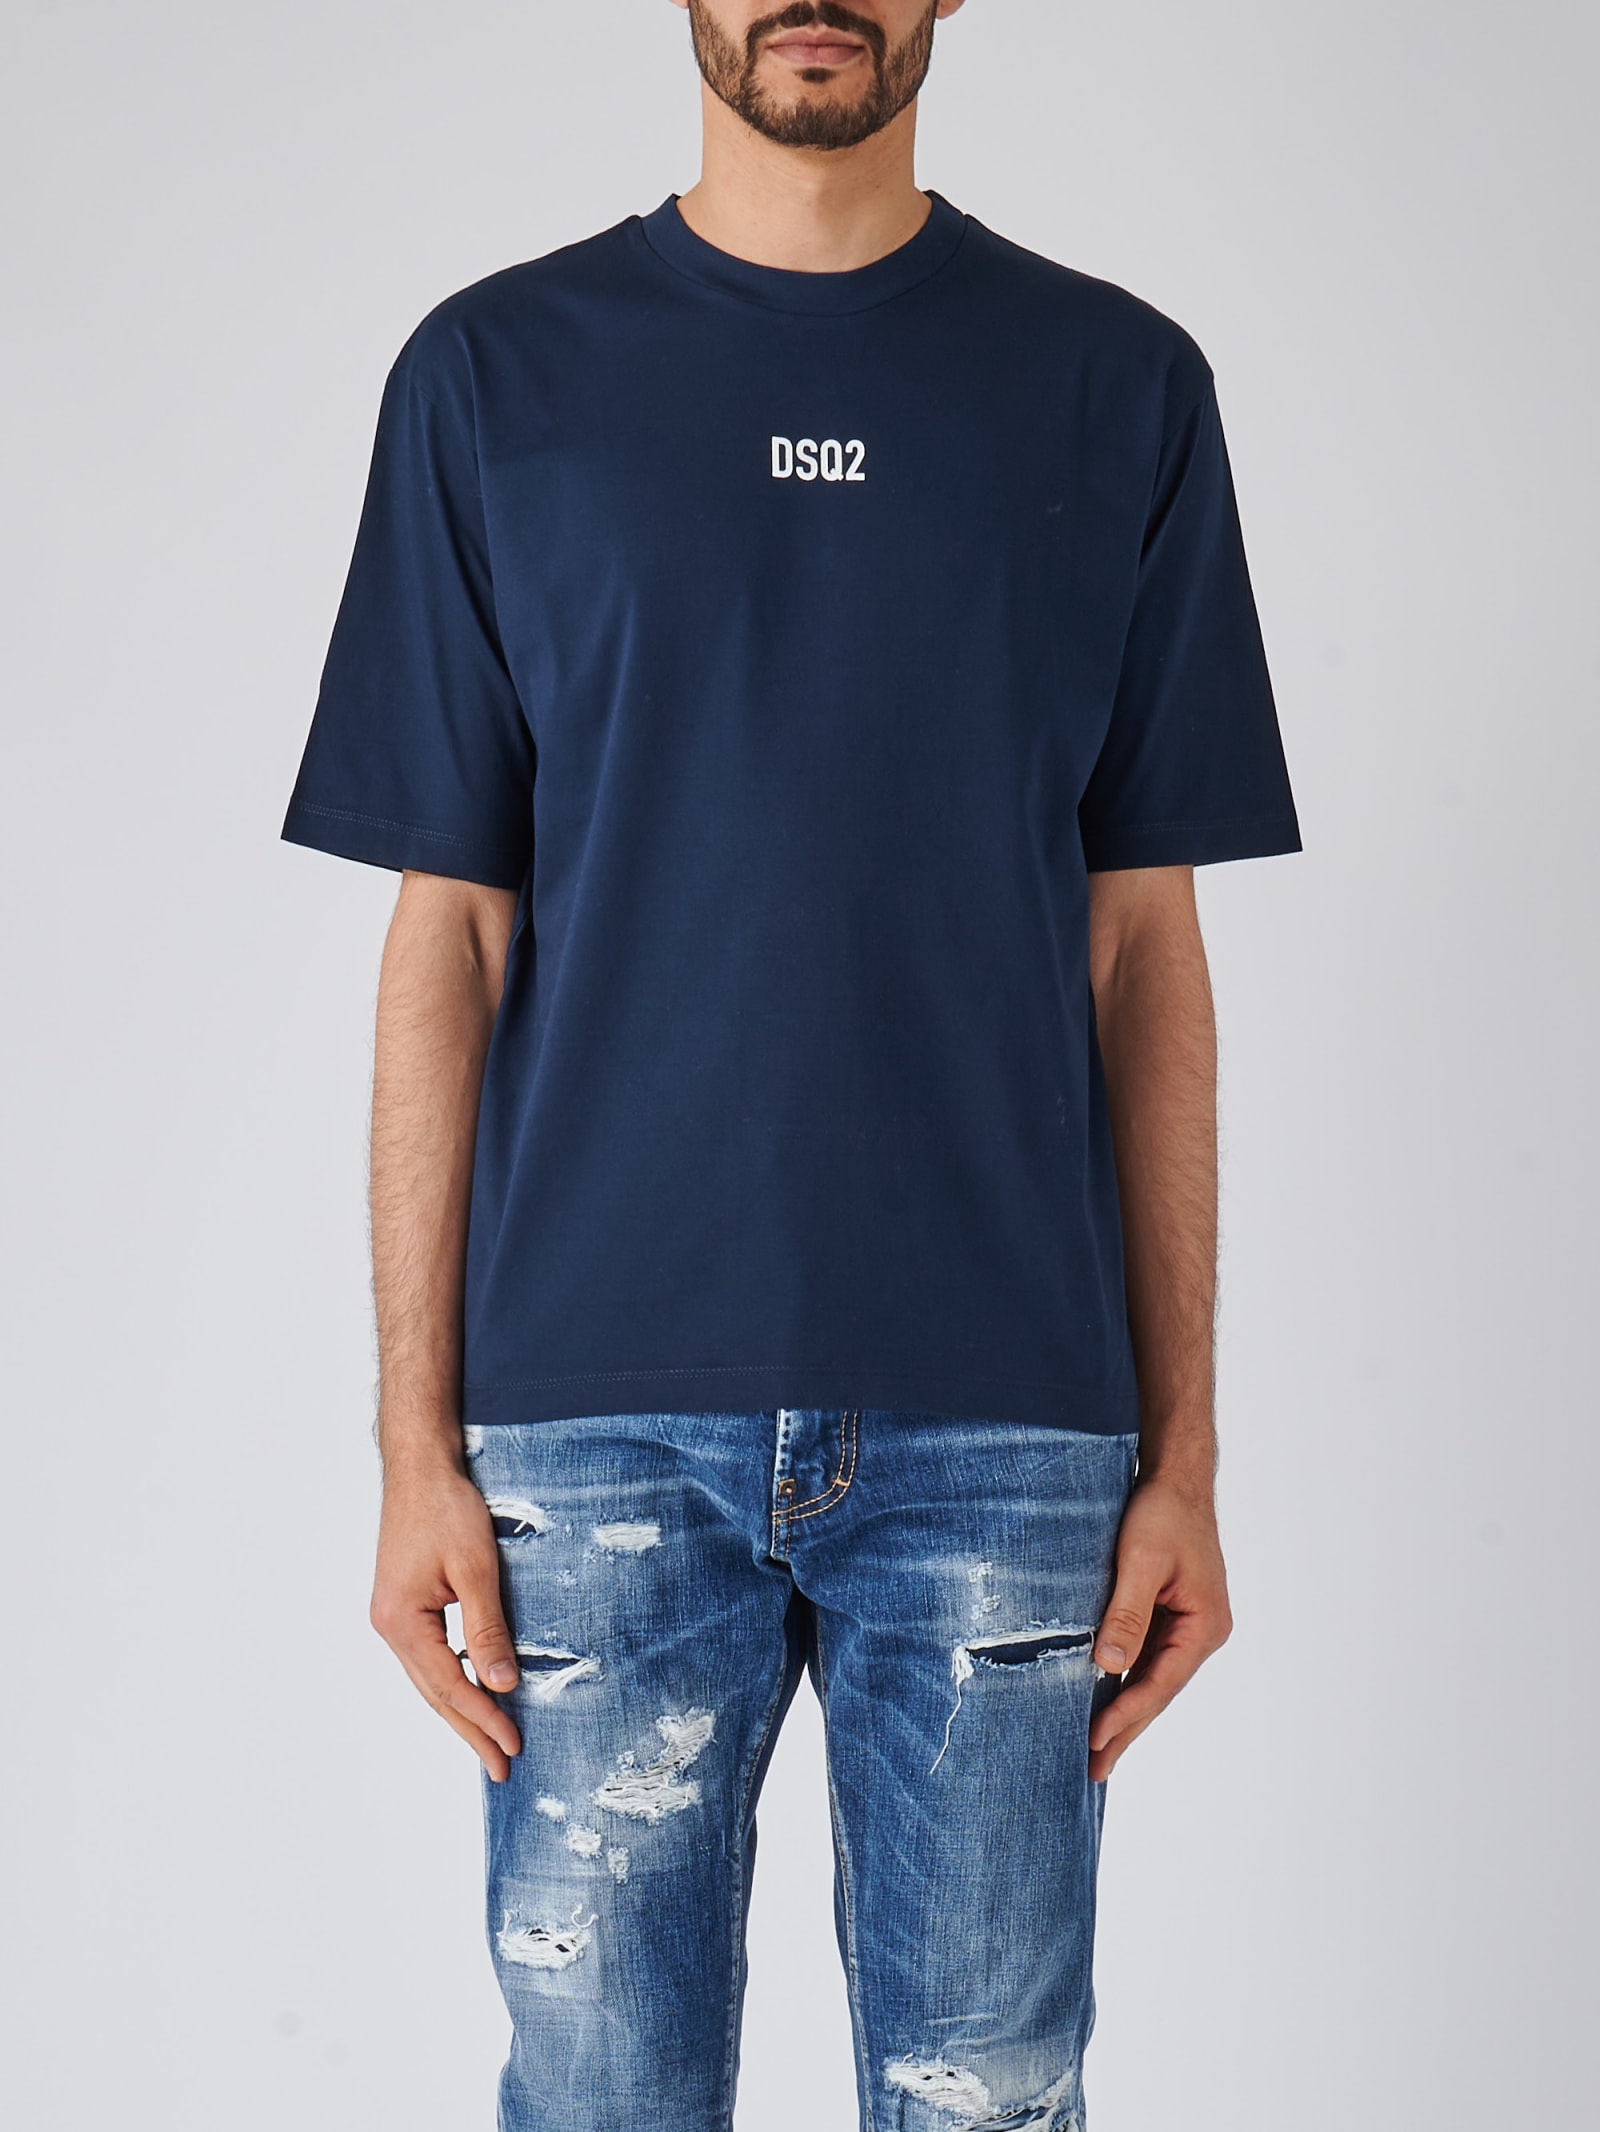 Loose Fit Tee T-shirt